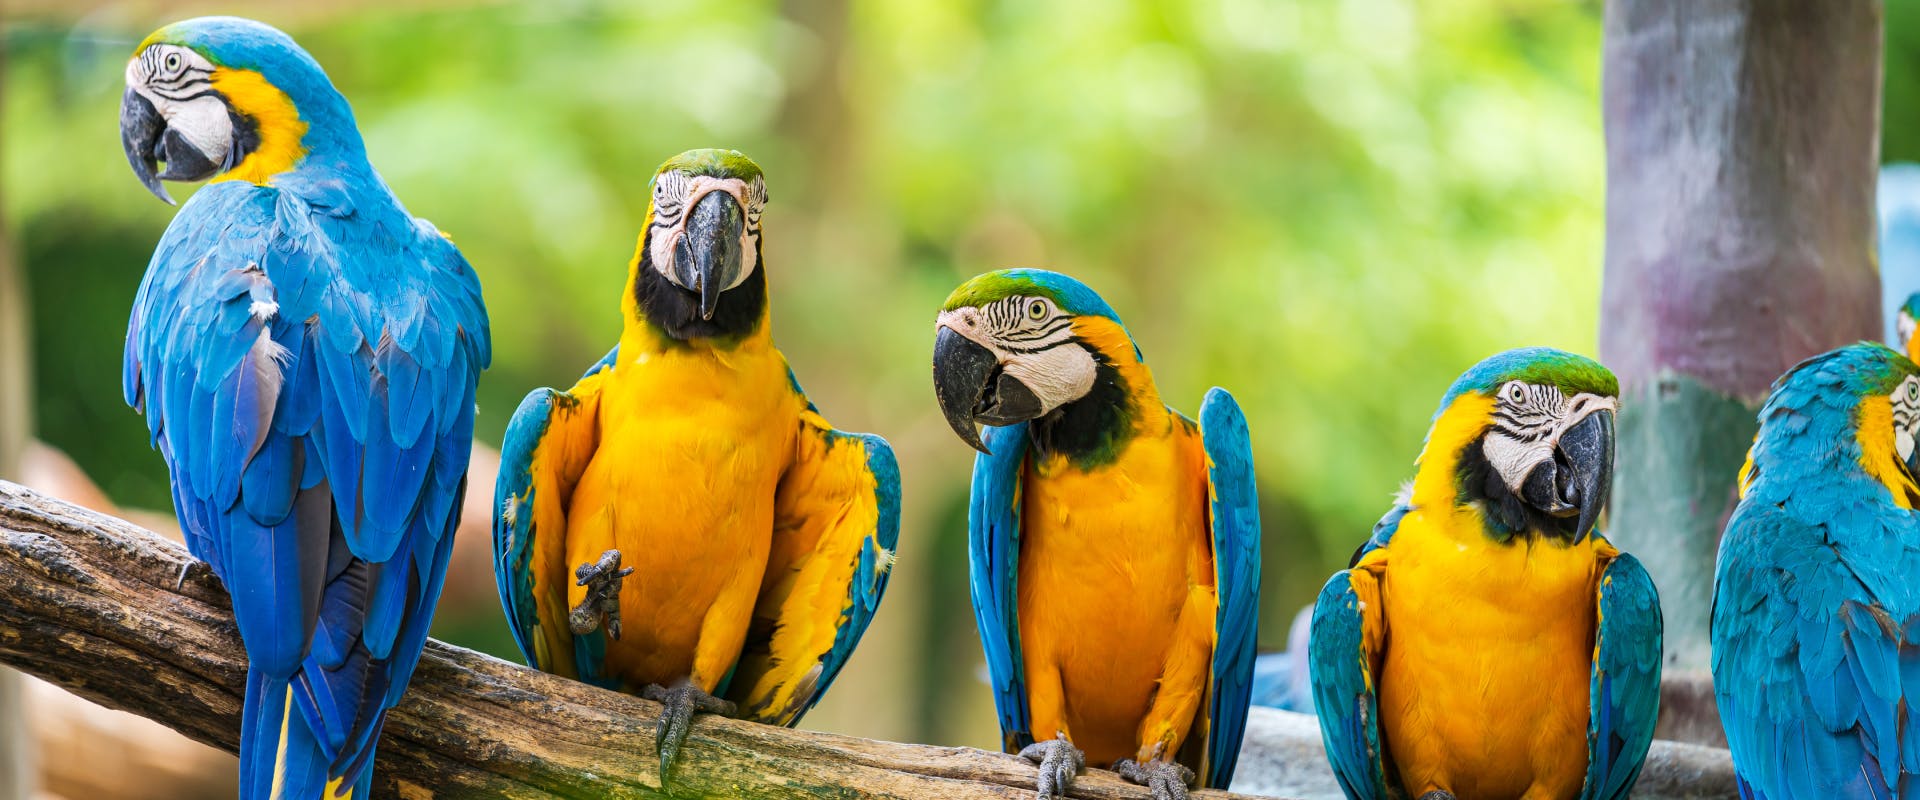 a flock of blue tailed macaws perched on a thick branch in a large bird cage